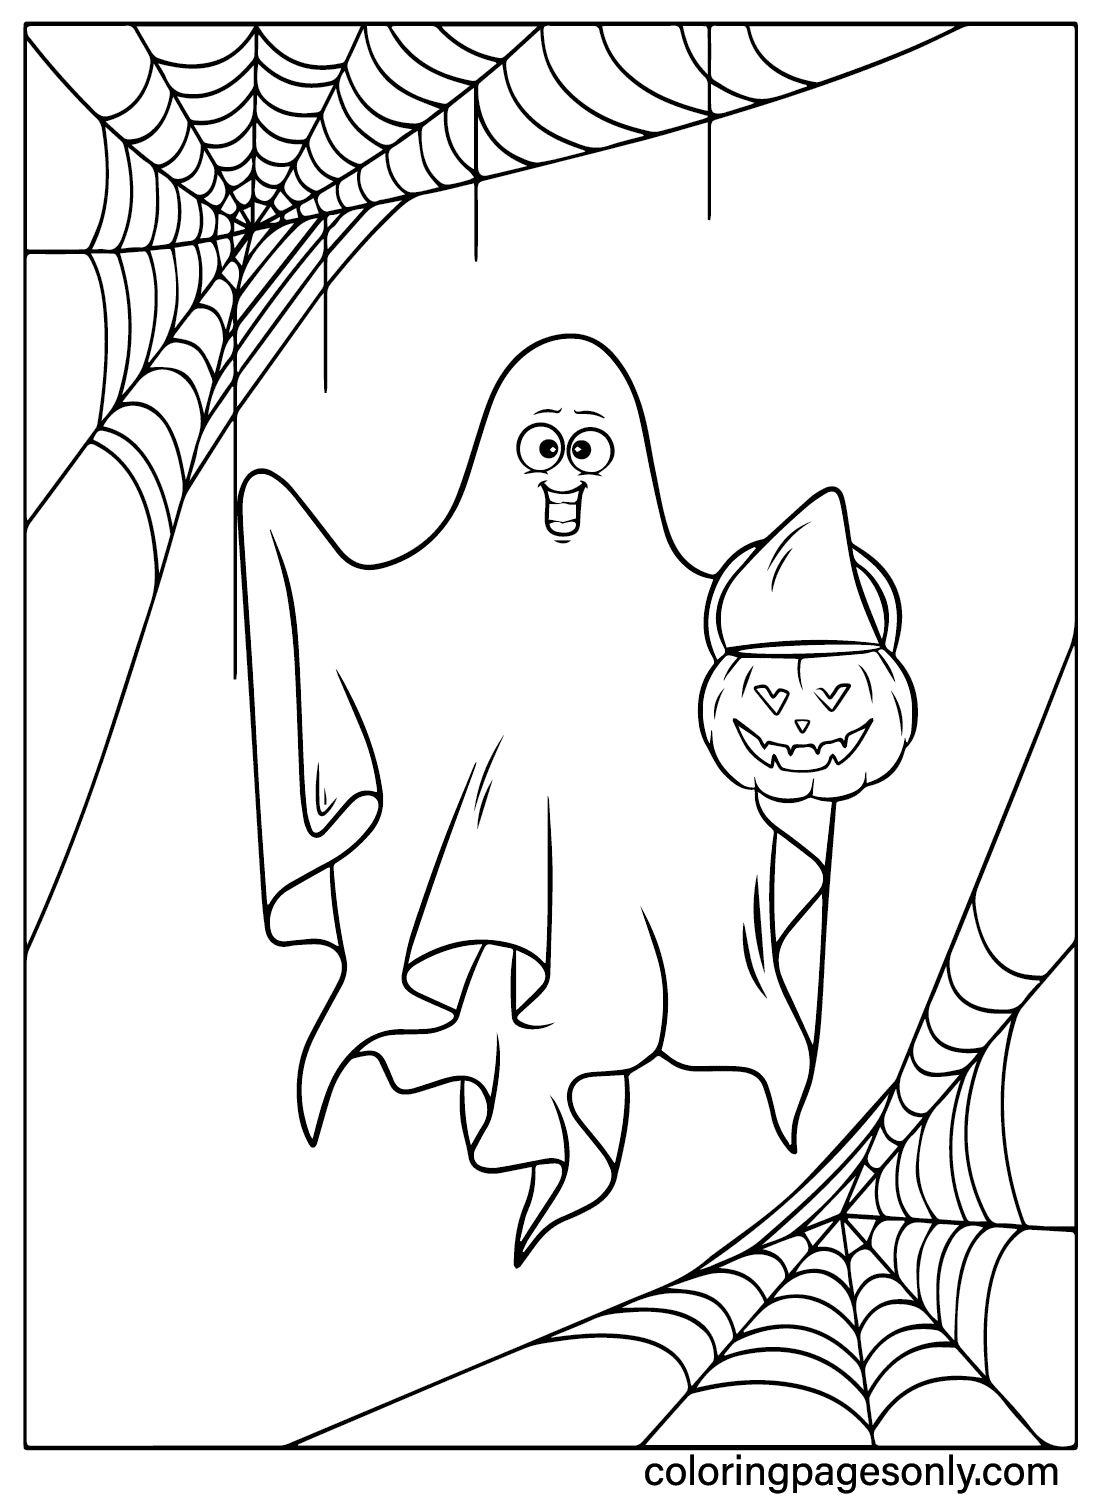 Cute Coloring Pages Halloween from Cute Halloween